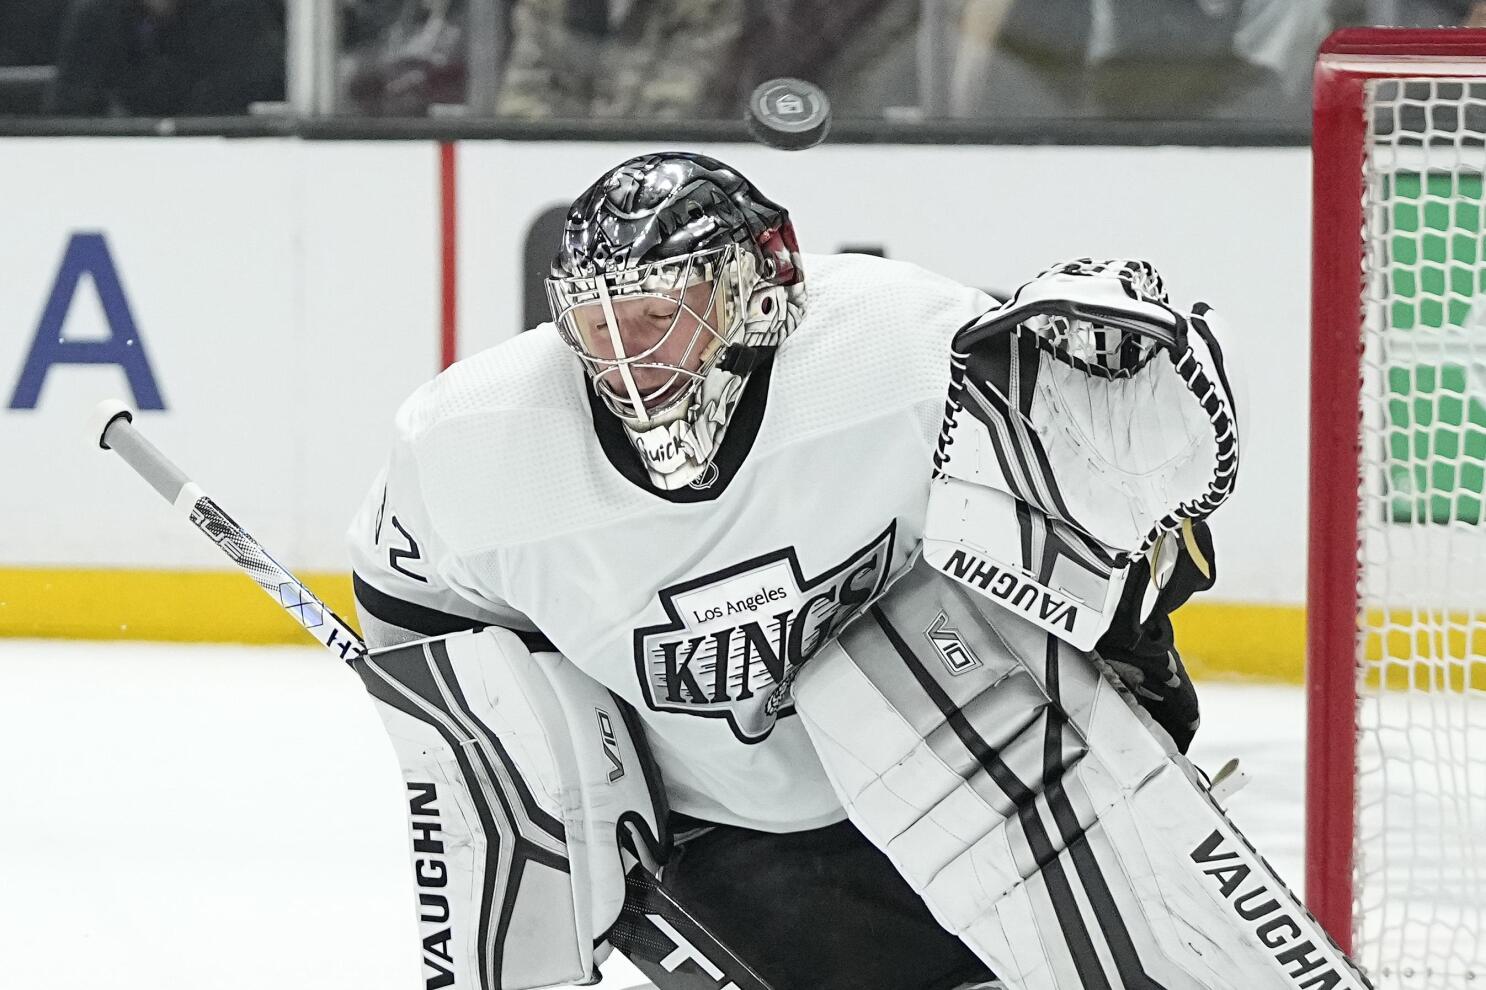 Los Angeles Kings Make Needed Roster Changes at the Deadline